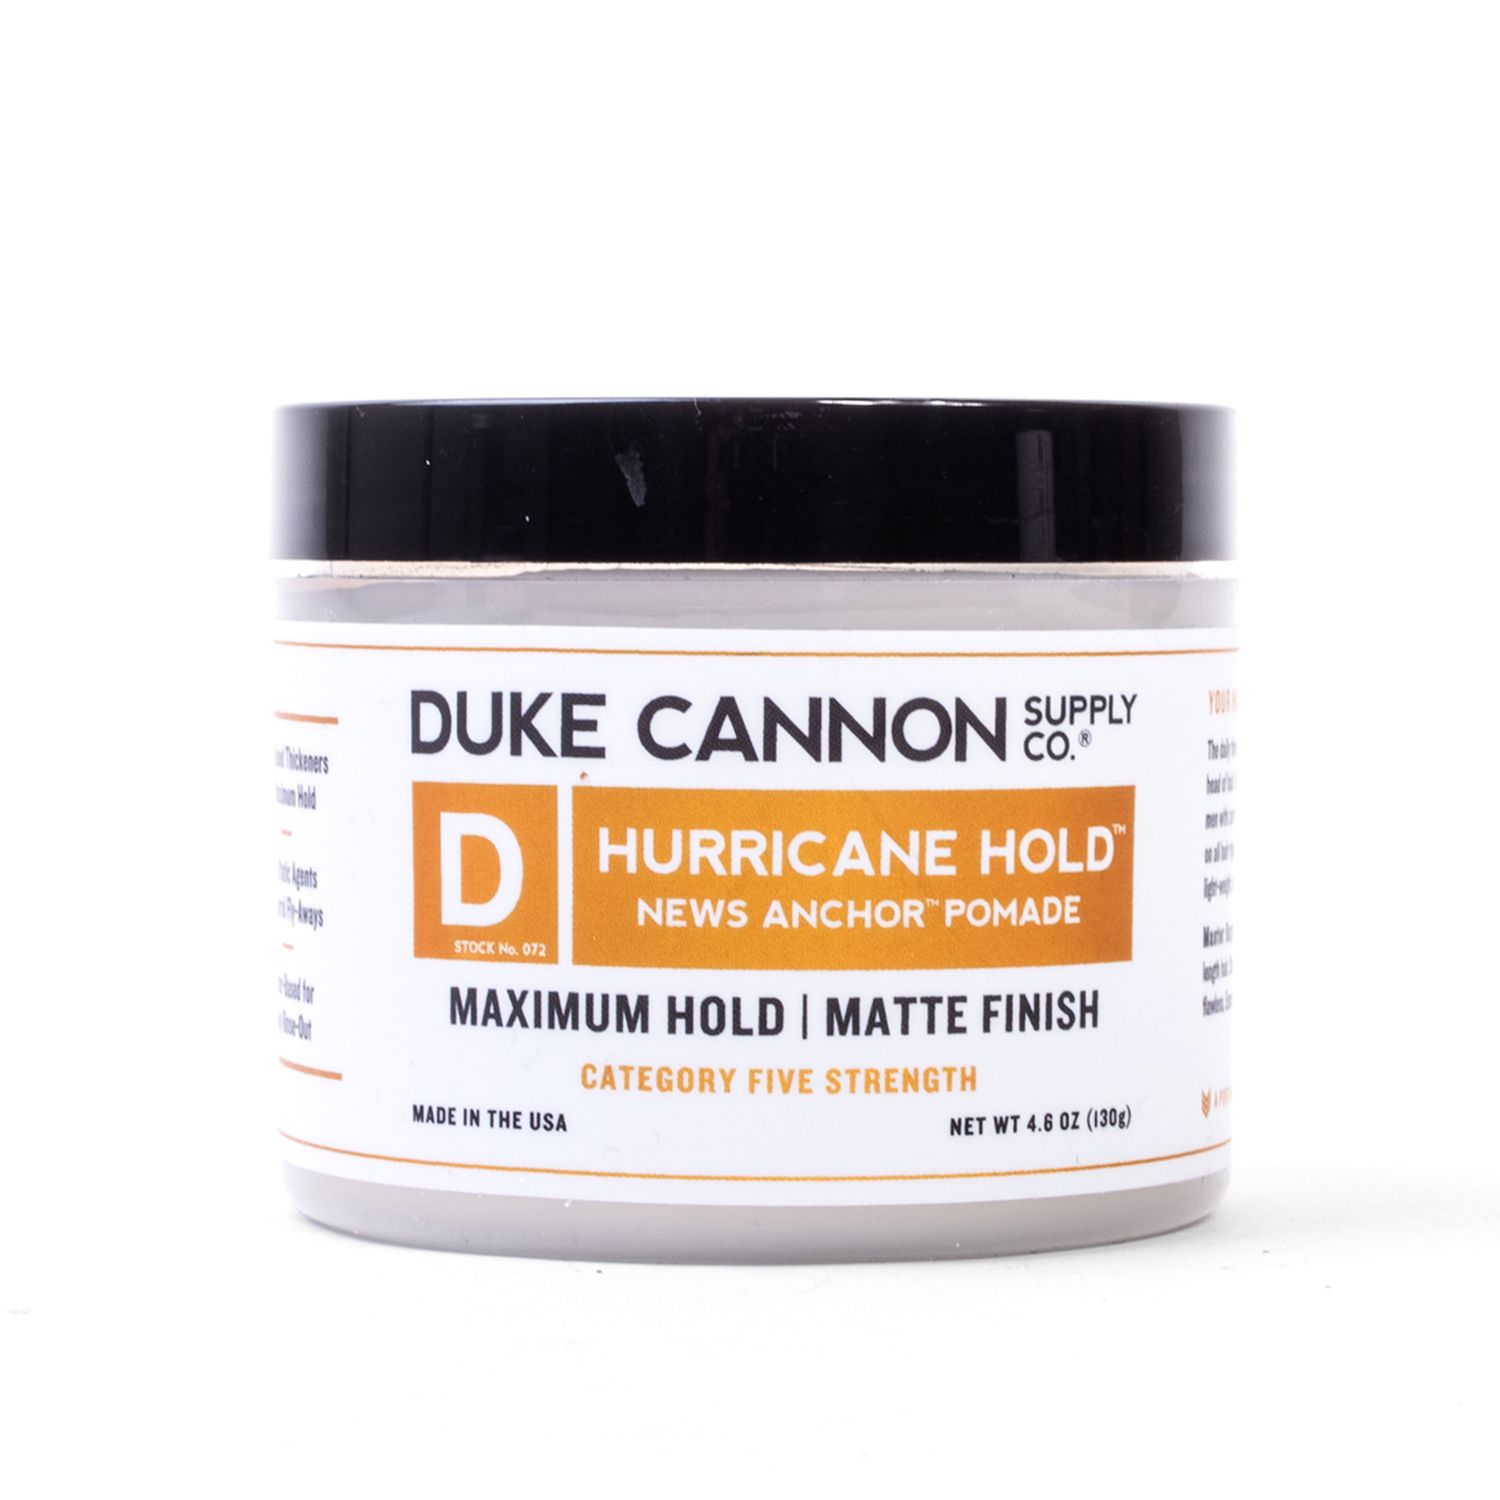 Image for Duke Cannon Supply Co. News Anchor Hurricane Hold Pomade at Kohl's.